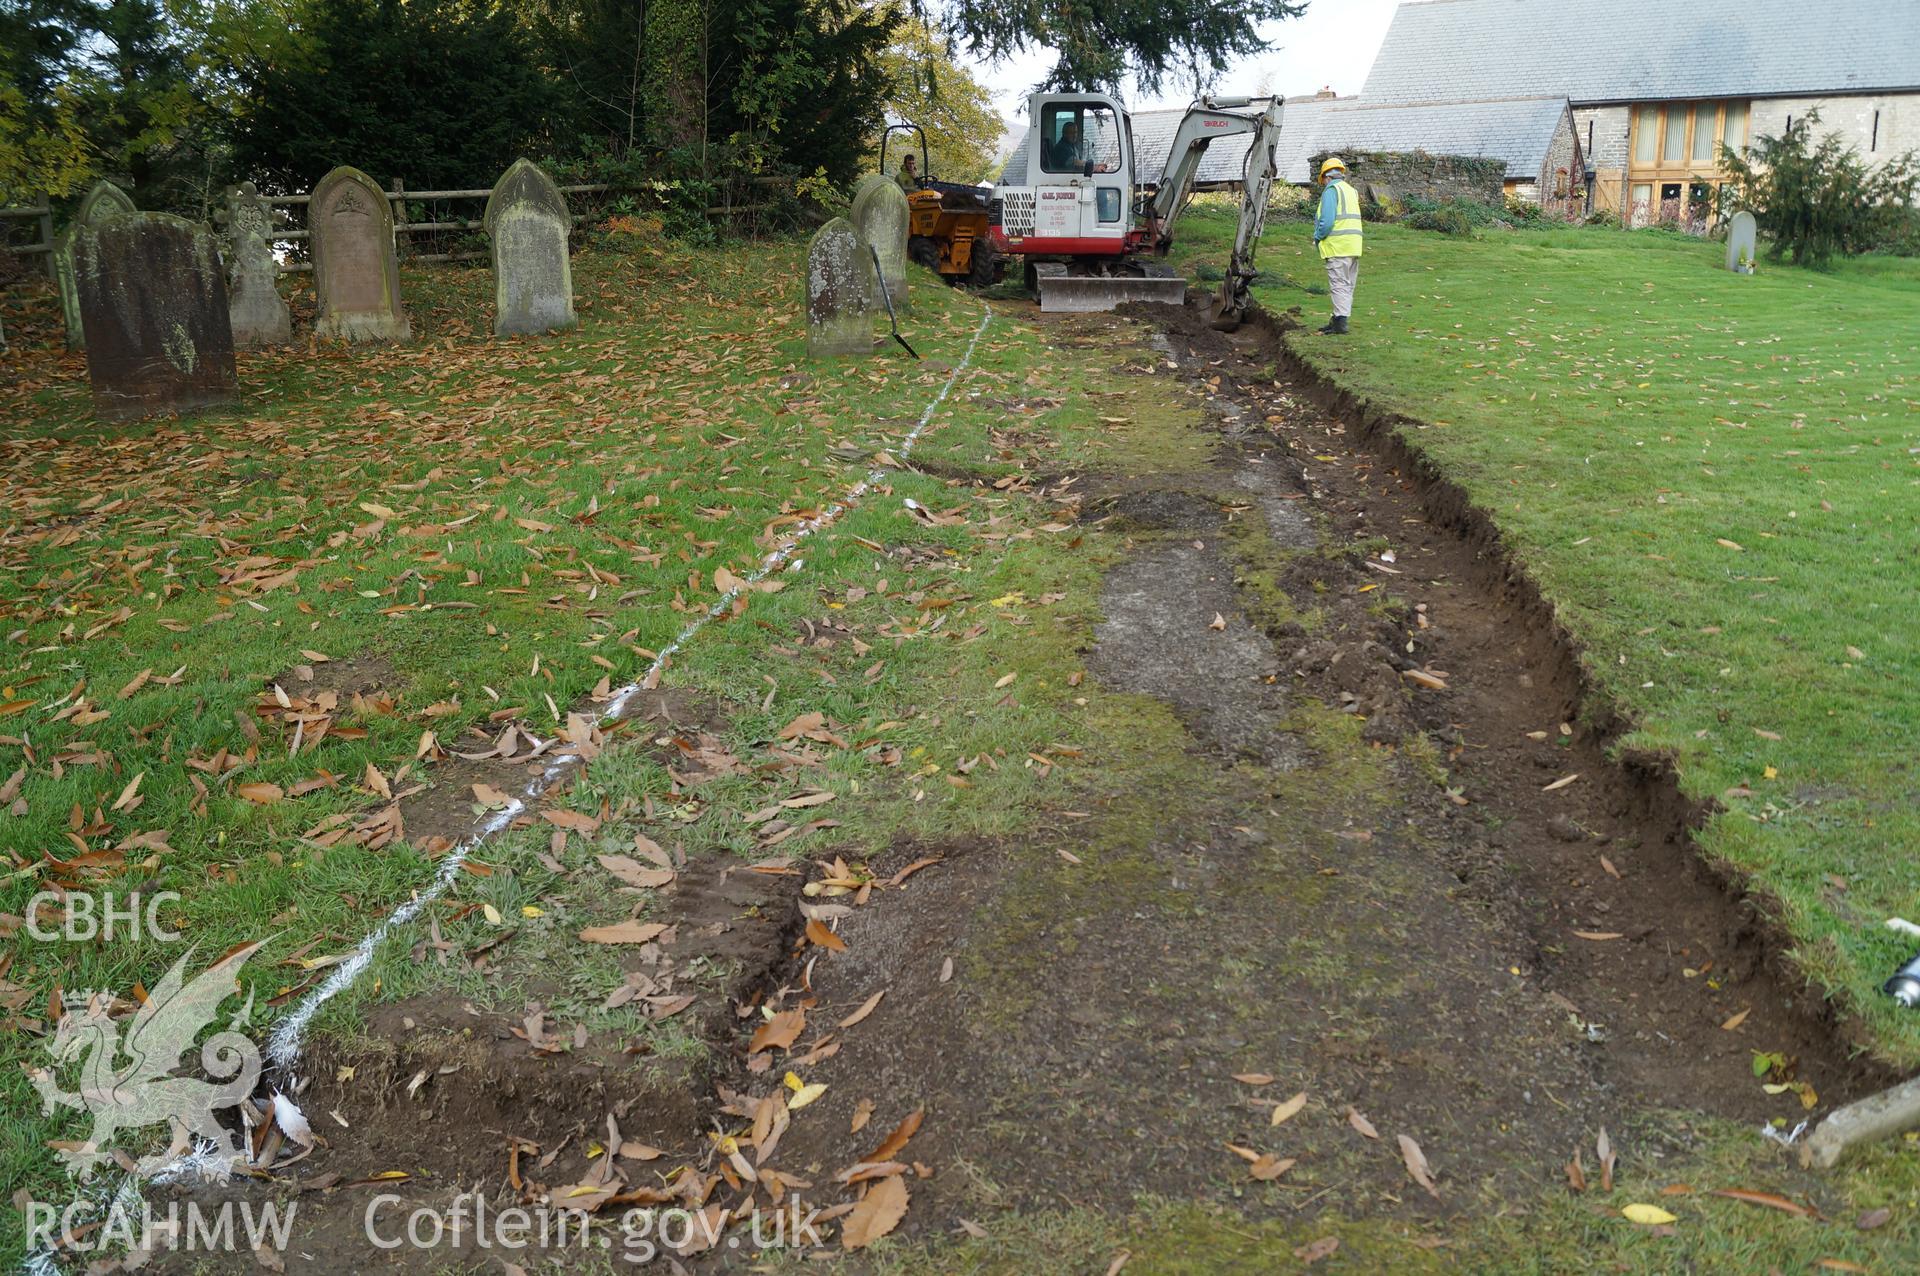 View 'looking west northwest at the trench on northeastern side of path, no archaeologically significant contexts records or artefacts retrieved' at St. Mary's church, Gladestry. Photograph & description by Jenny Hall & Paul Sambrook of Trysor, 16/10/2017.